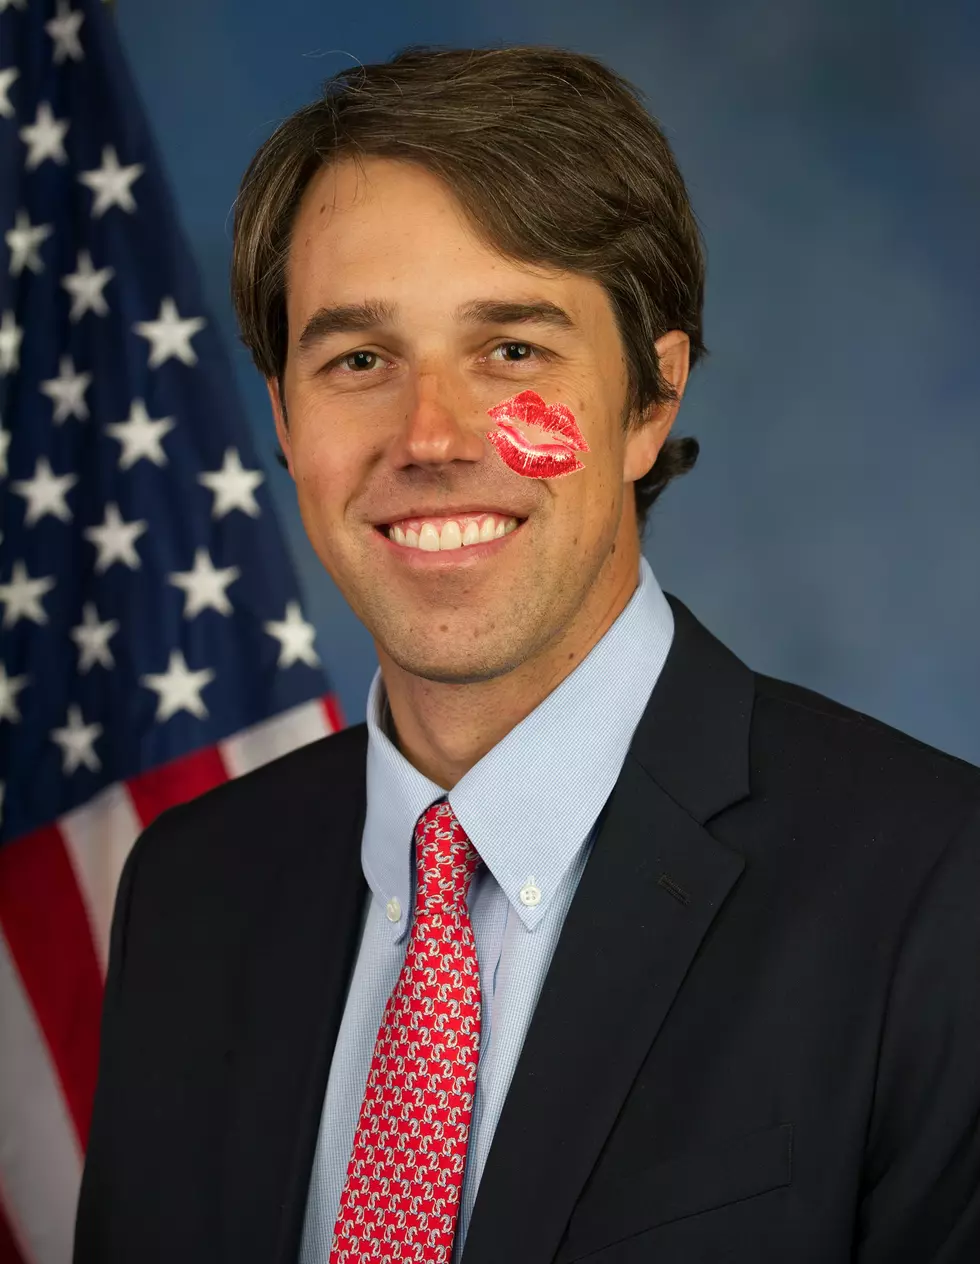 El Paso State Rep Beto O’Rourke Is One of the Sexiest Members of Congress